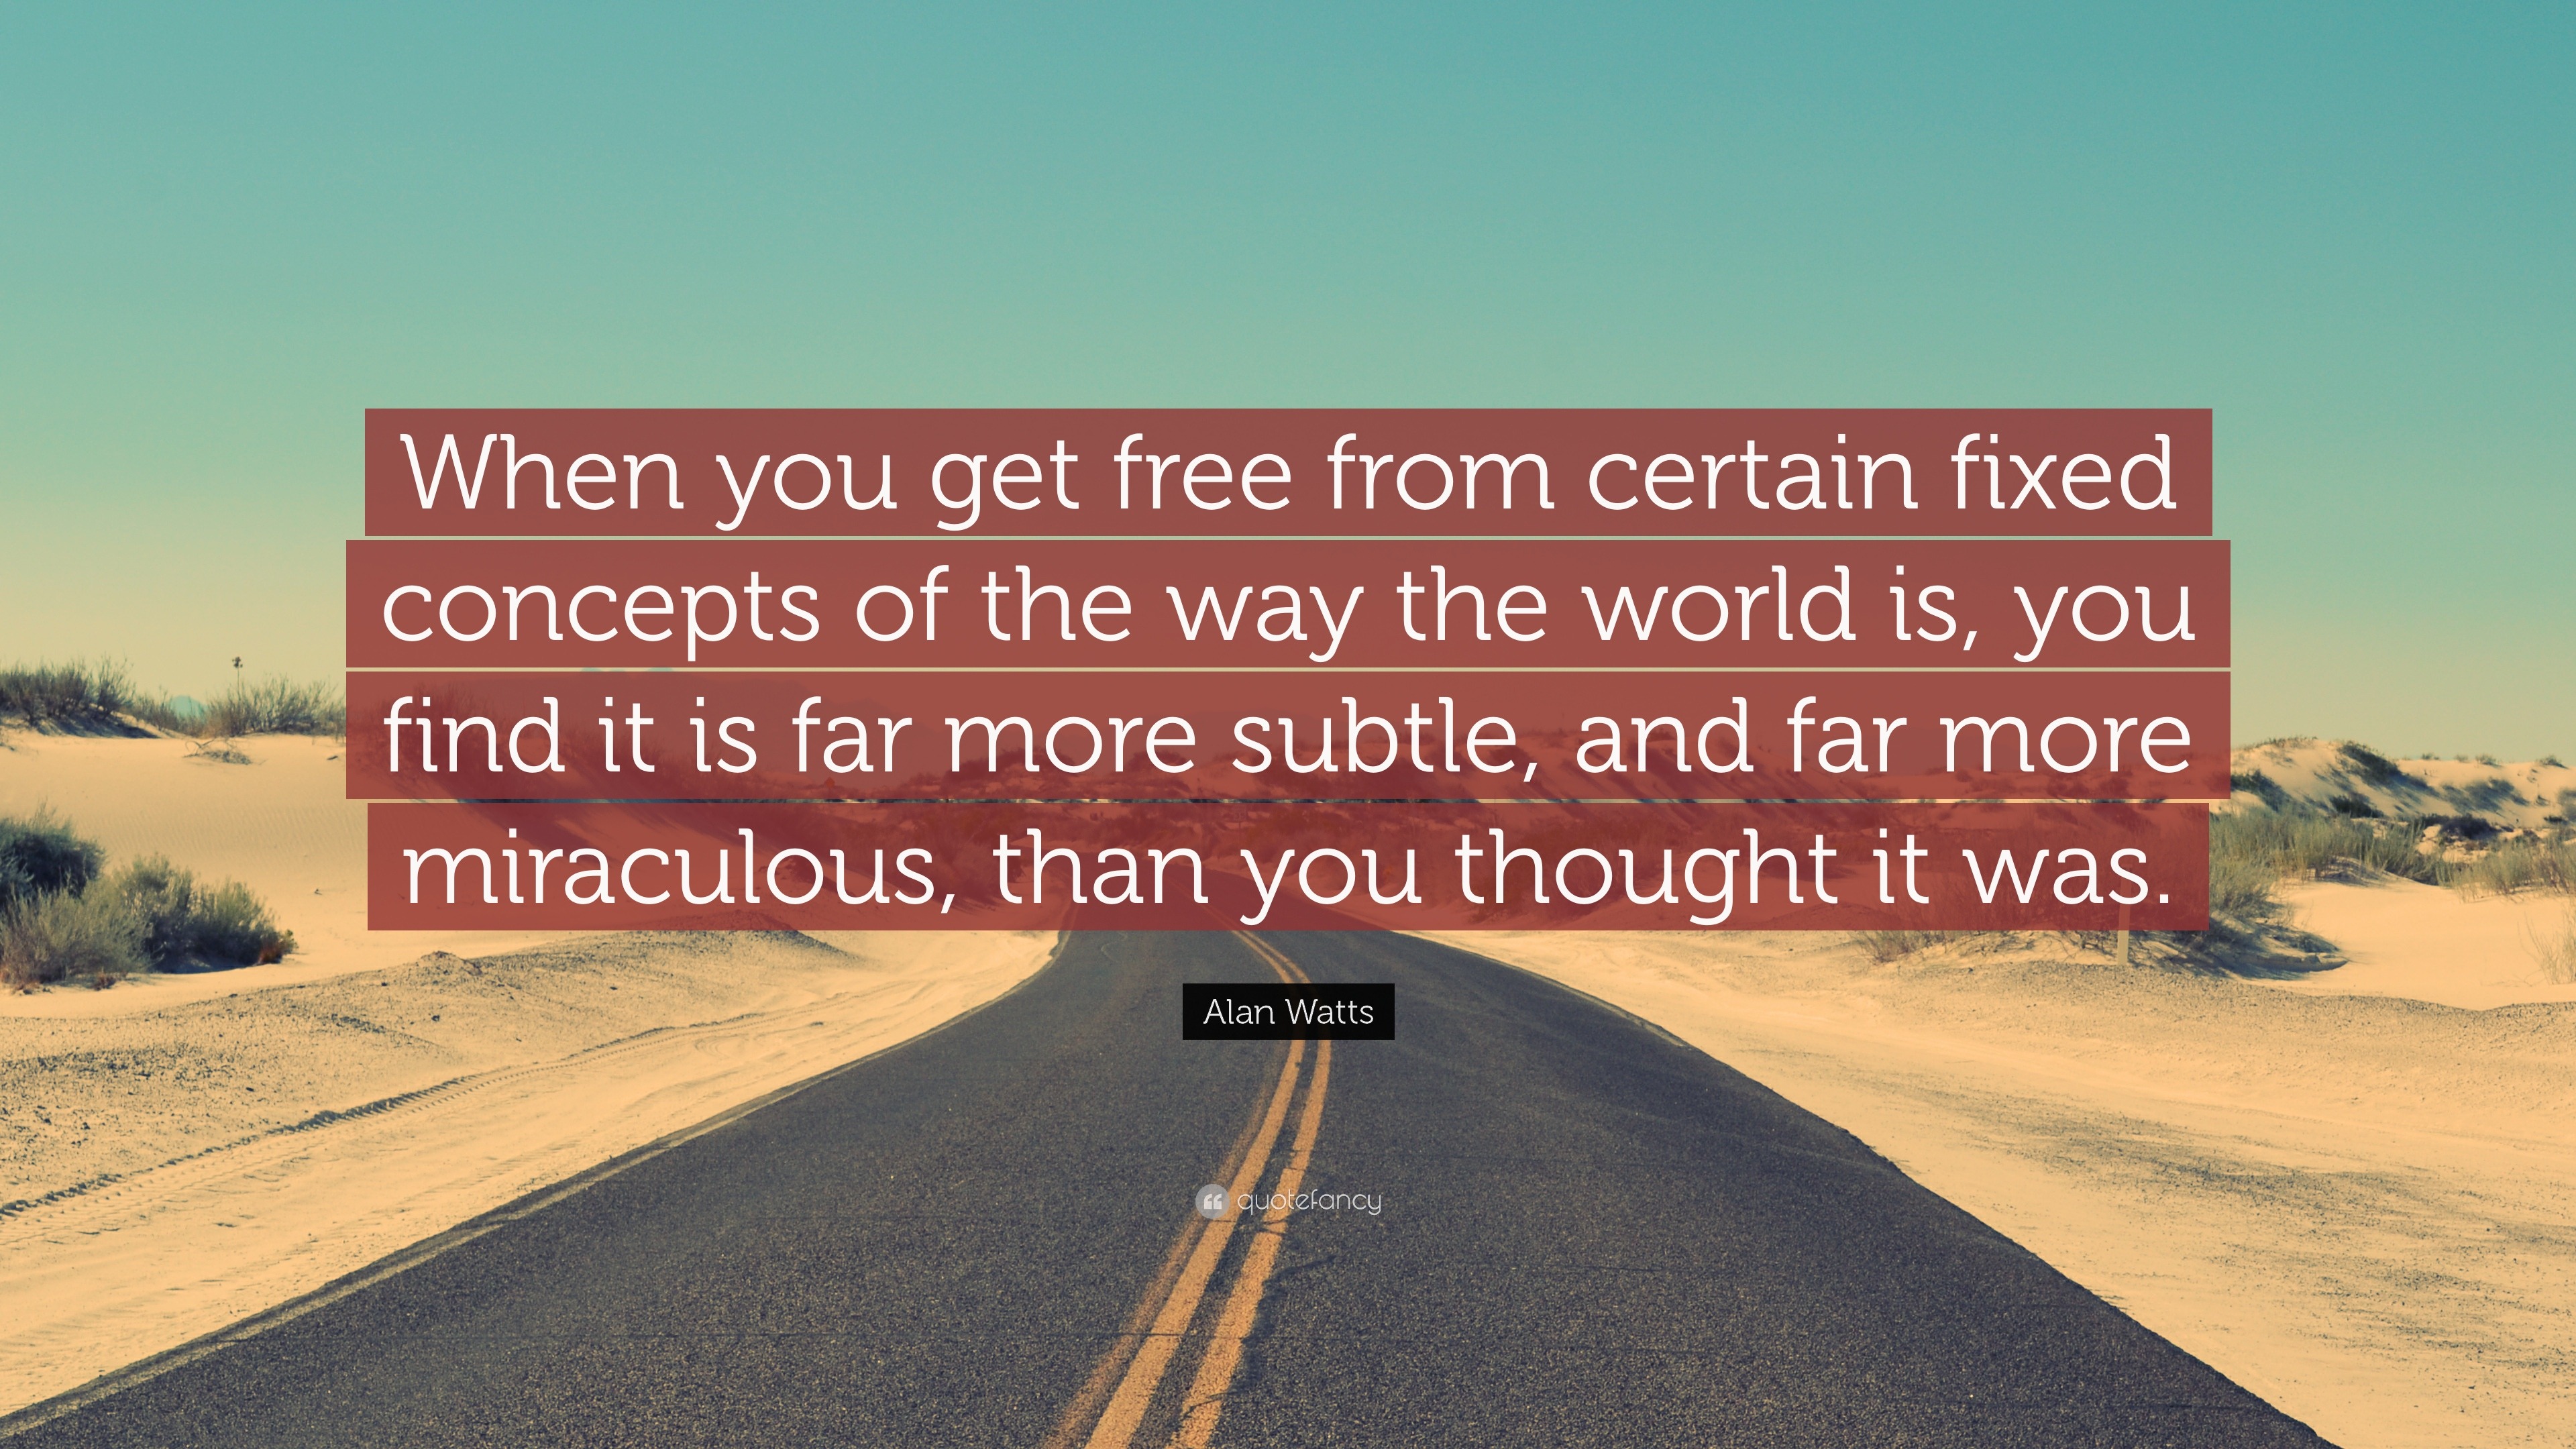 Alan Watts Quote: “When you get free from certain fixed concepts of the